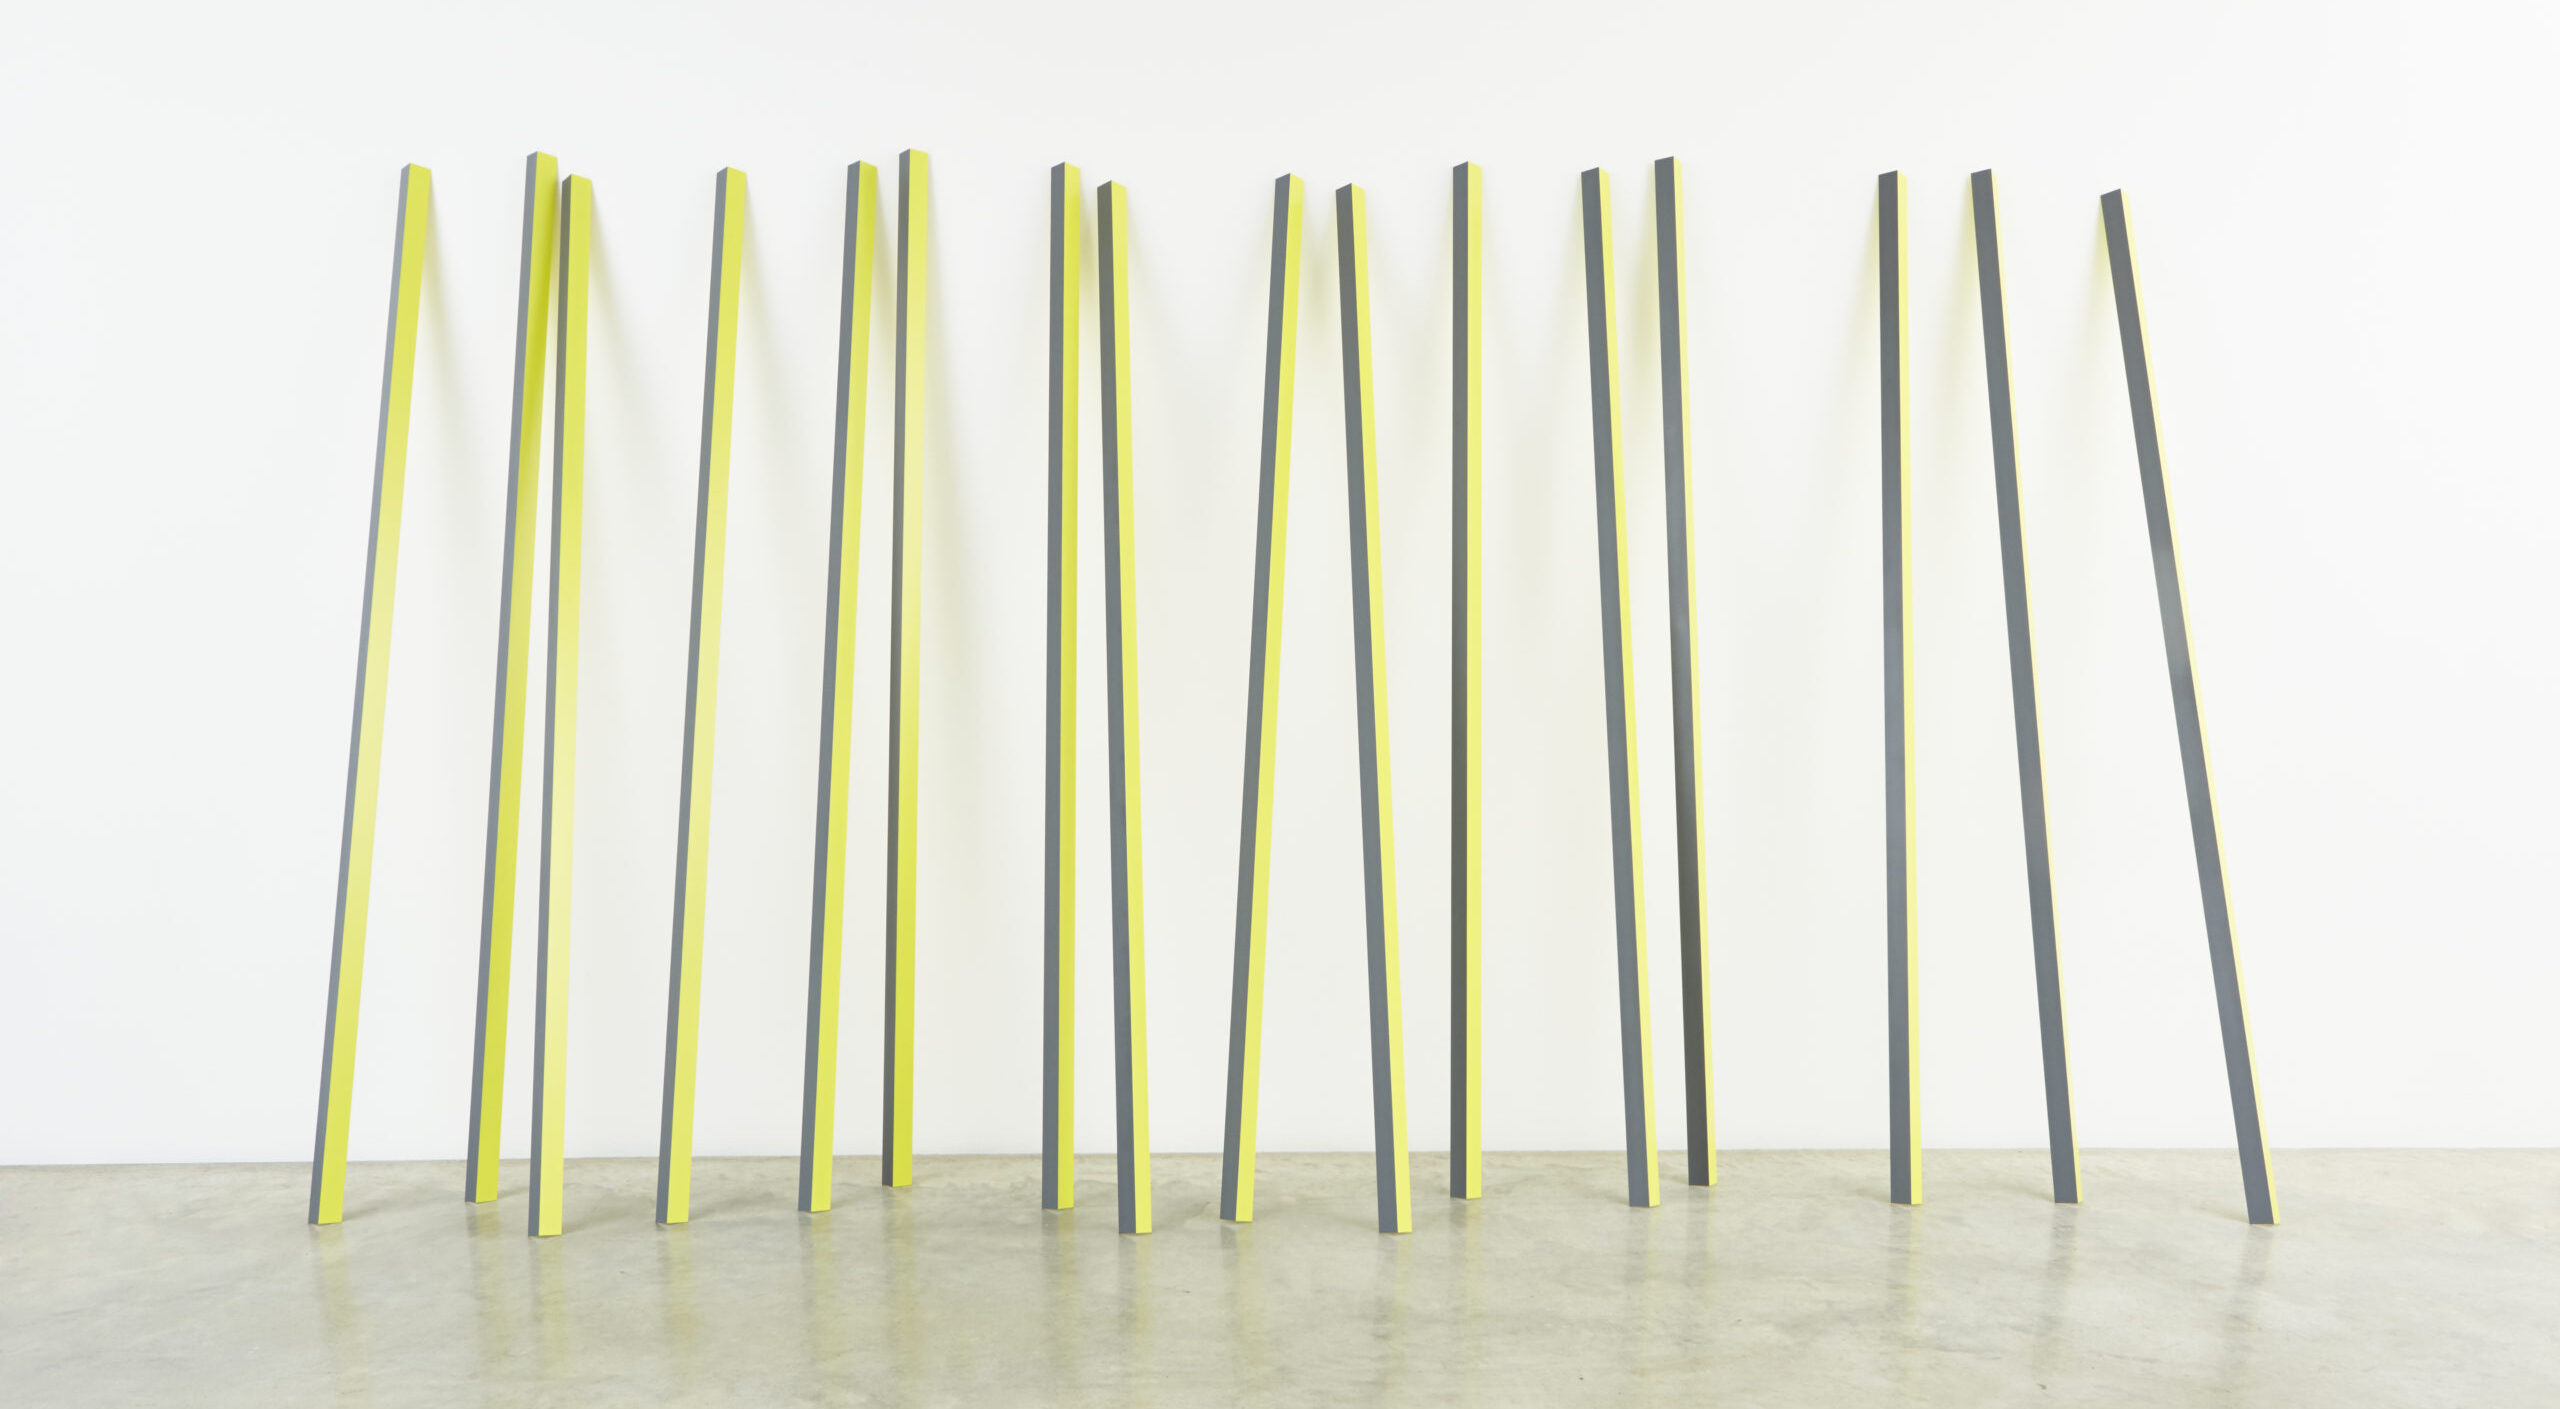 Sixteen rectangular yellow and grey aluminum poles lean up against a wall